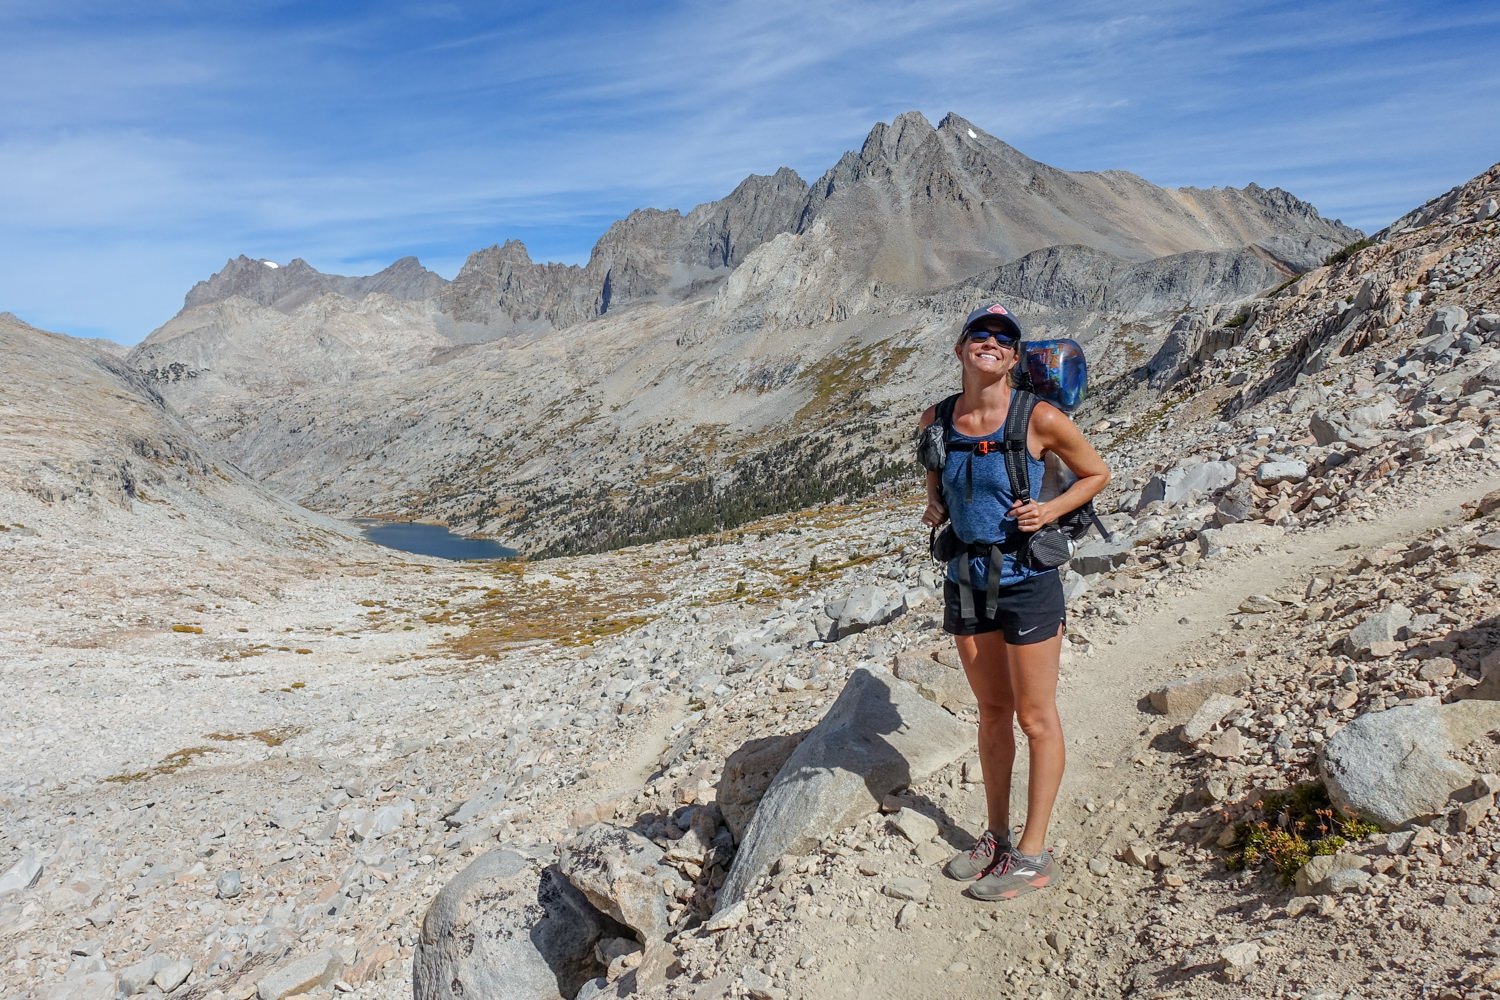 A female backpacker wearing the Nike Dri-FIT Tempo shorts on a mountain pass along the John Muir Trail